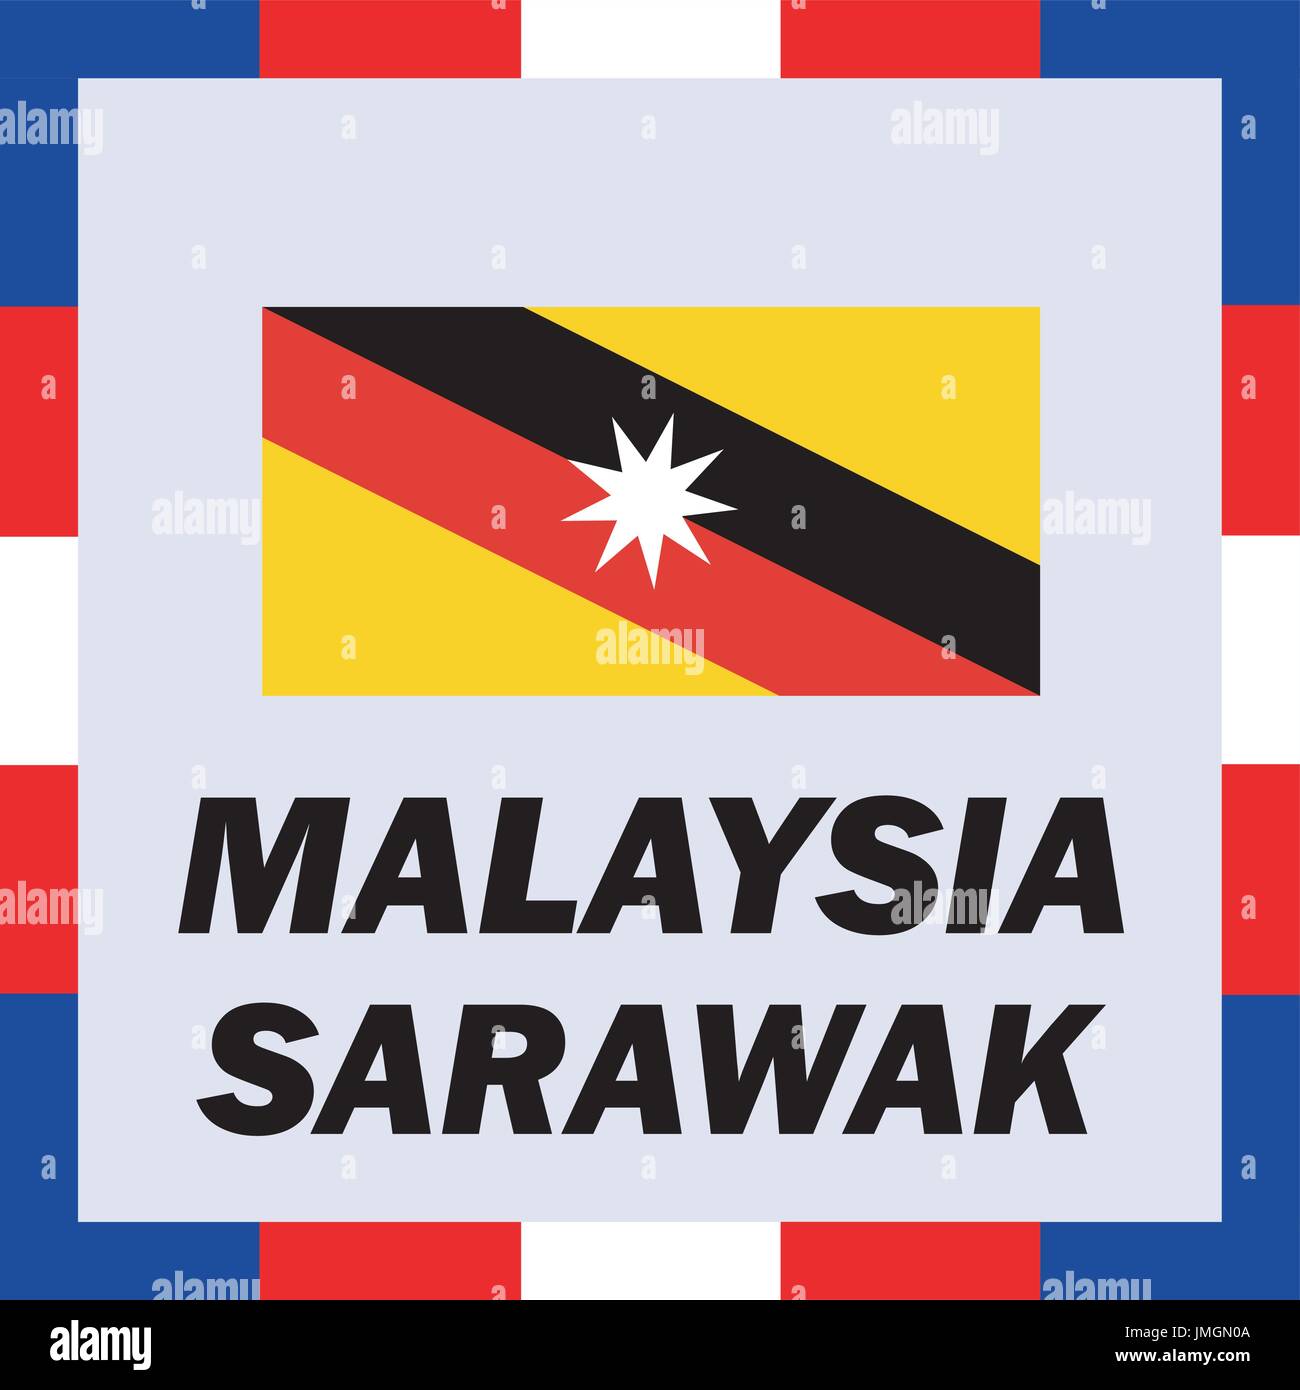 Official ensigns, flag and coat of arm of Malaysia - Sarawak Stock Vector